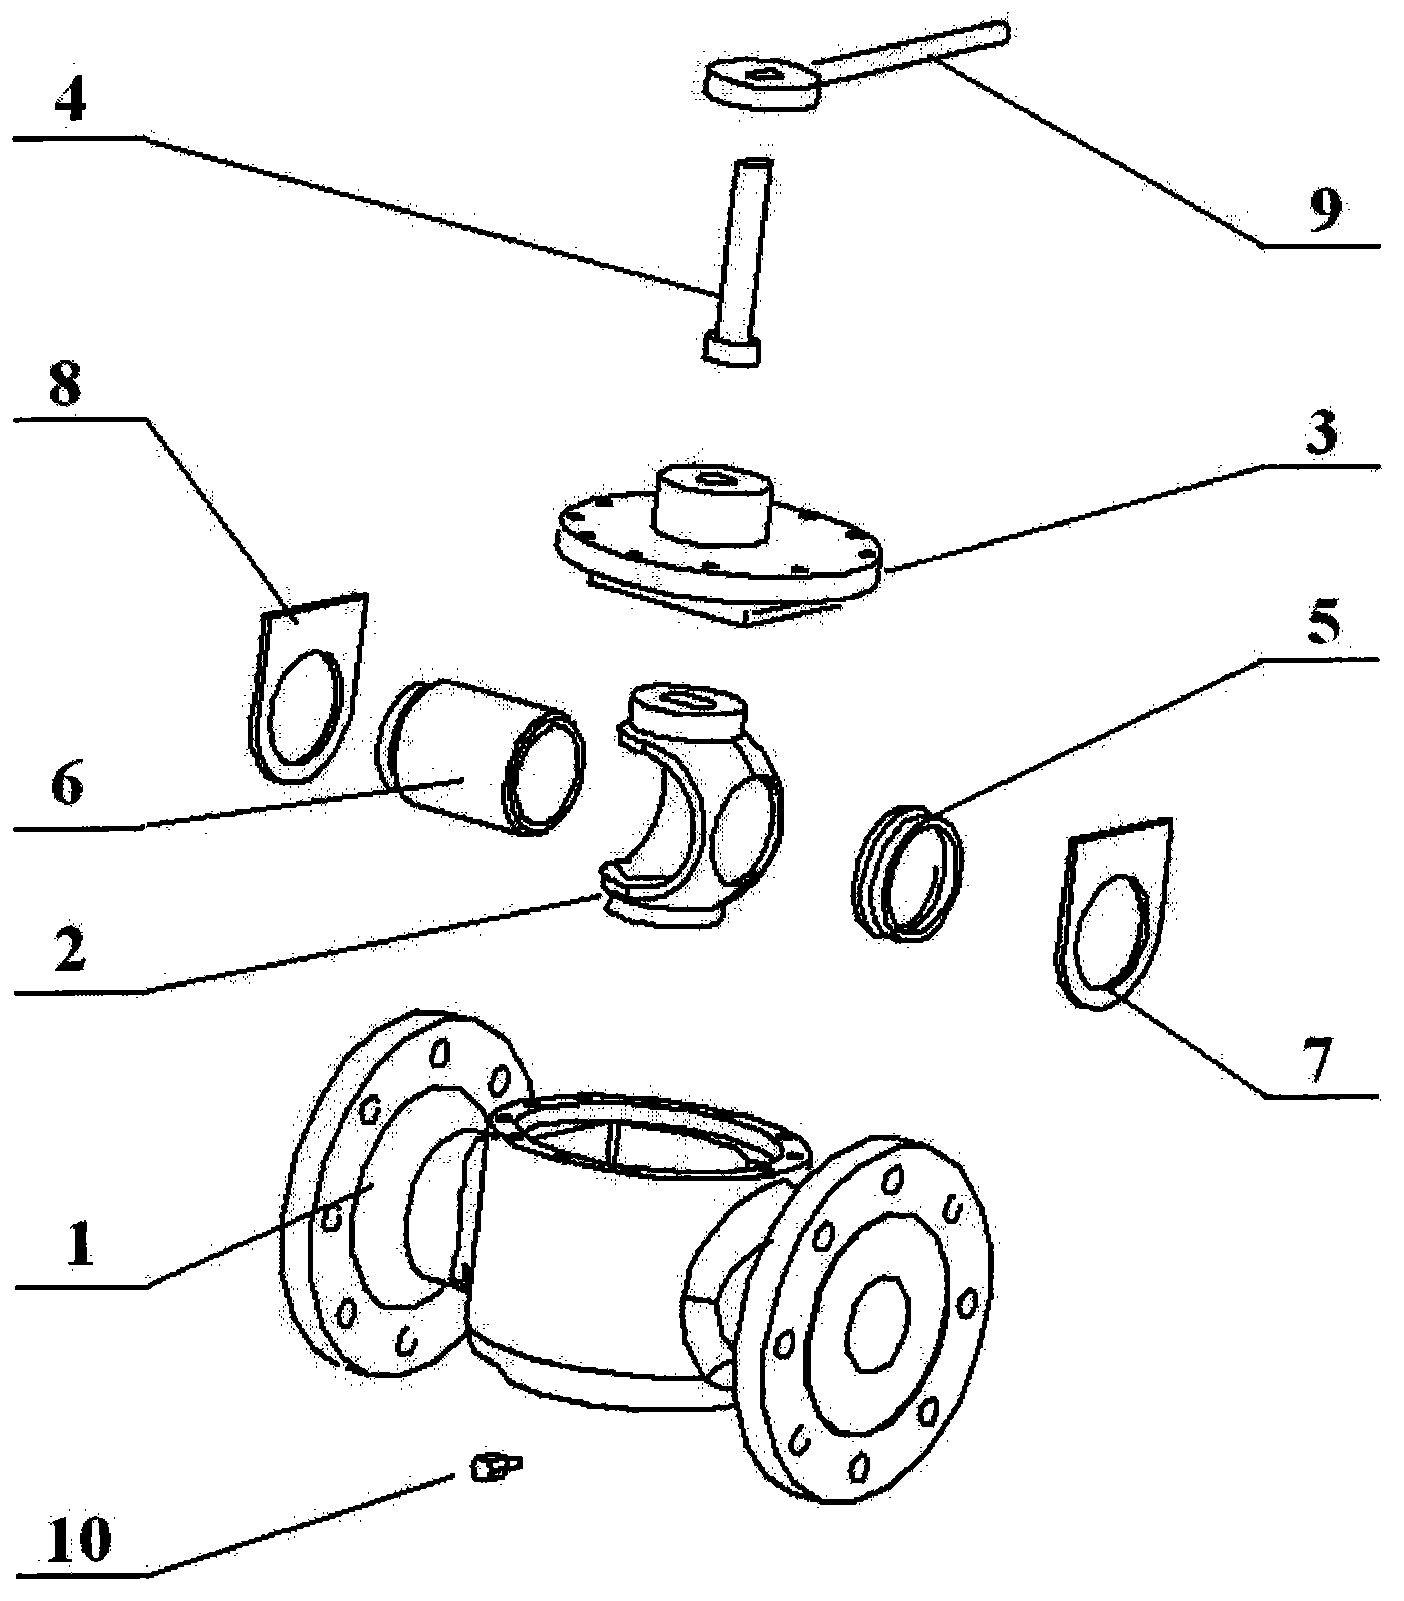 Forced seal valve with modular design and angular travel operation